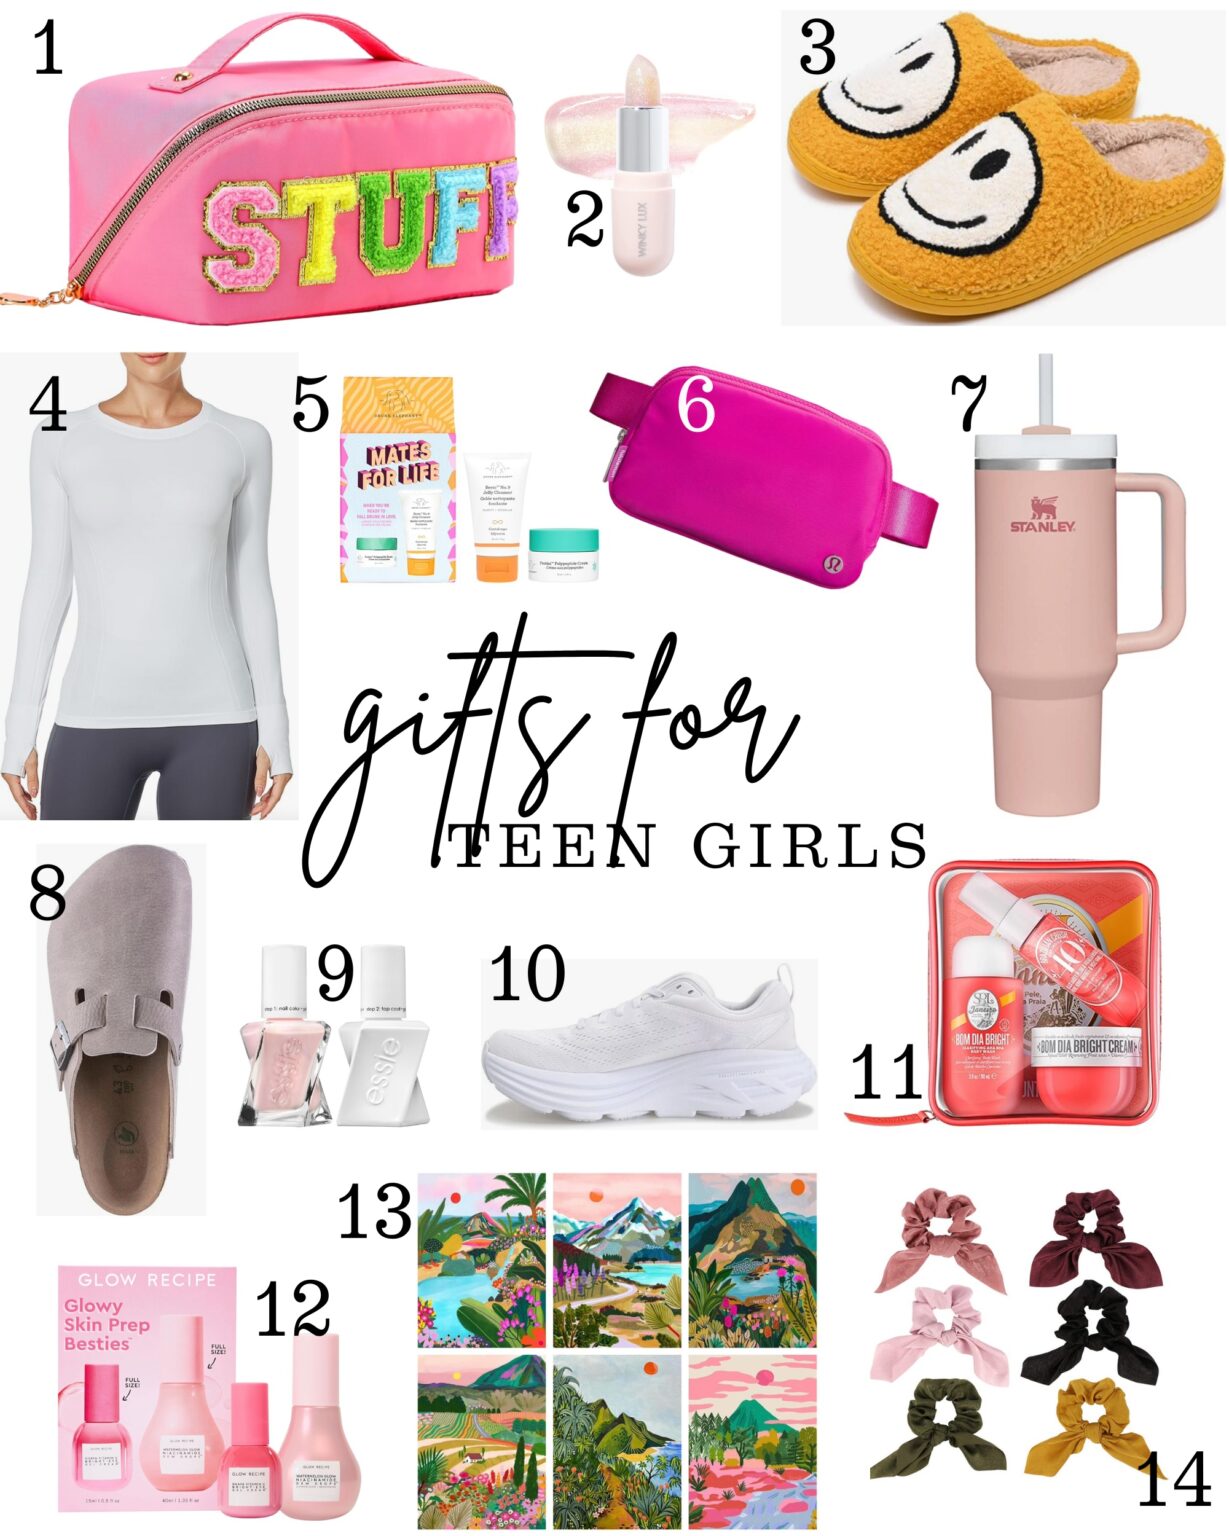 2023 Christmas gift guides- present ideas for everyone